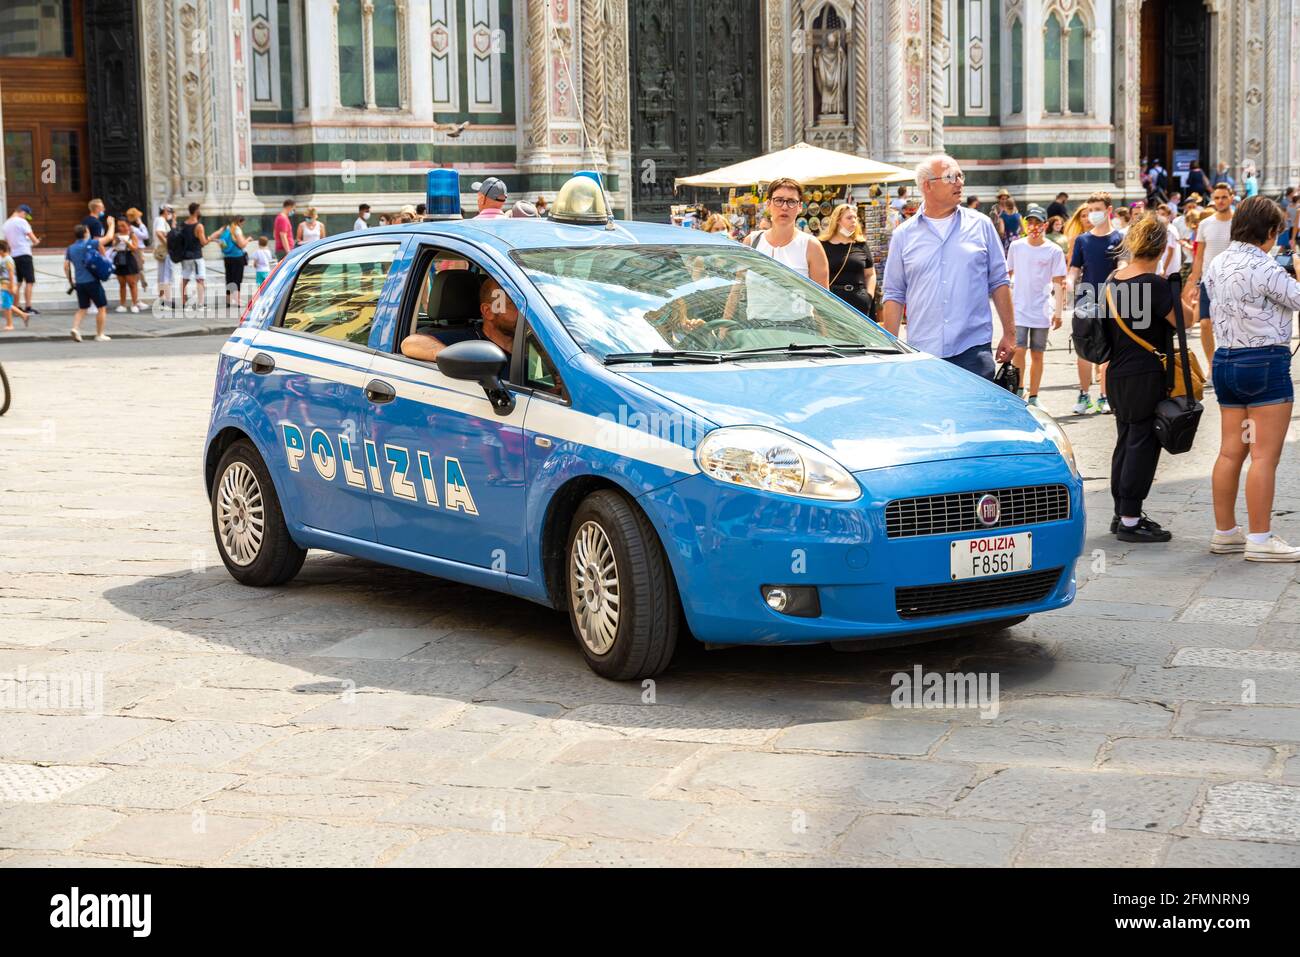 FLORENCE, ITALY - Aug 24, 2020: Florence, Tuscany/Italy - 24.08.2020: A blue Italian police car in the midst of tourists in Florence ensuring safety. Stock Photo